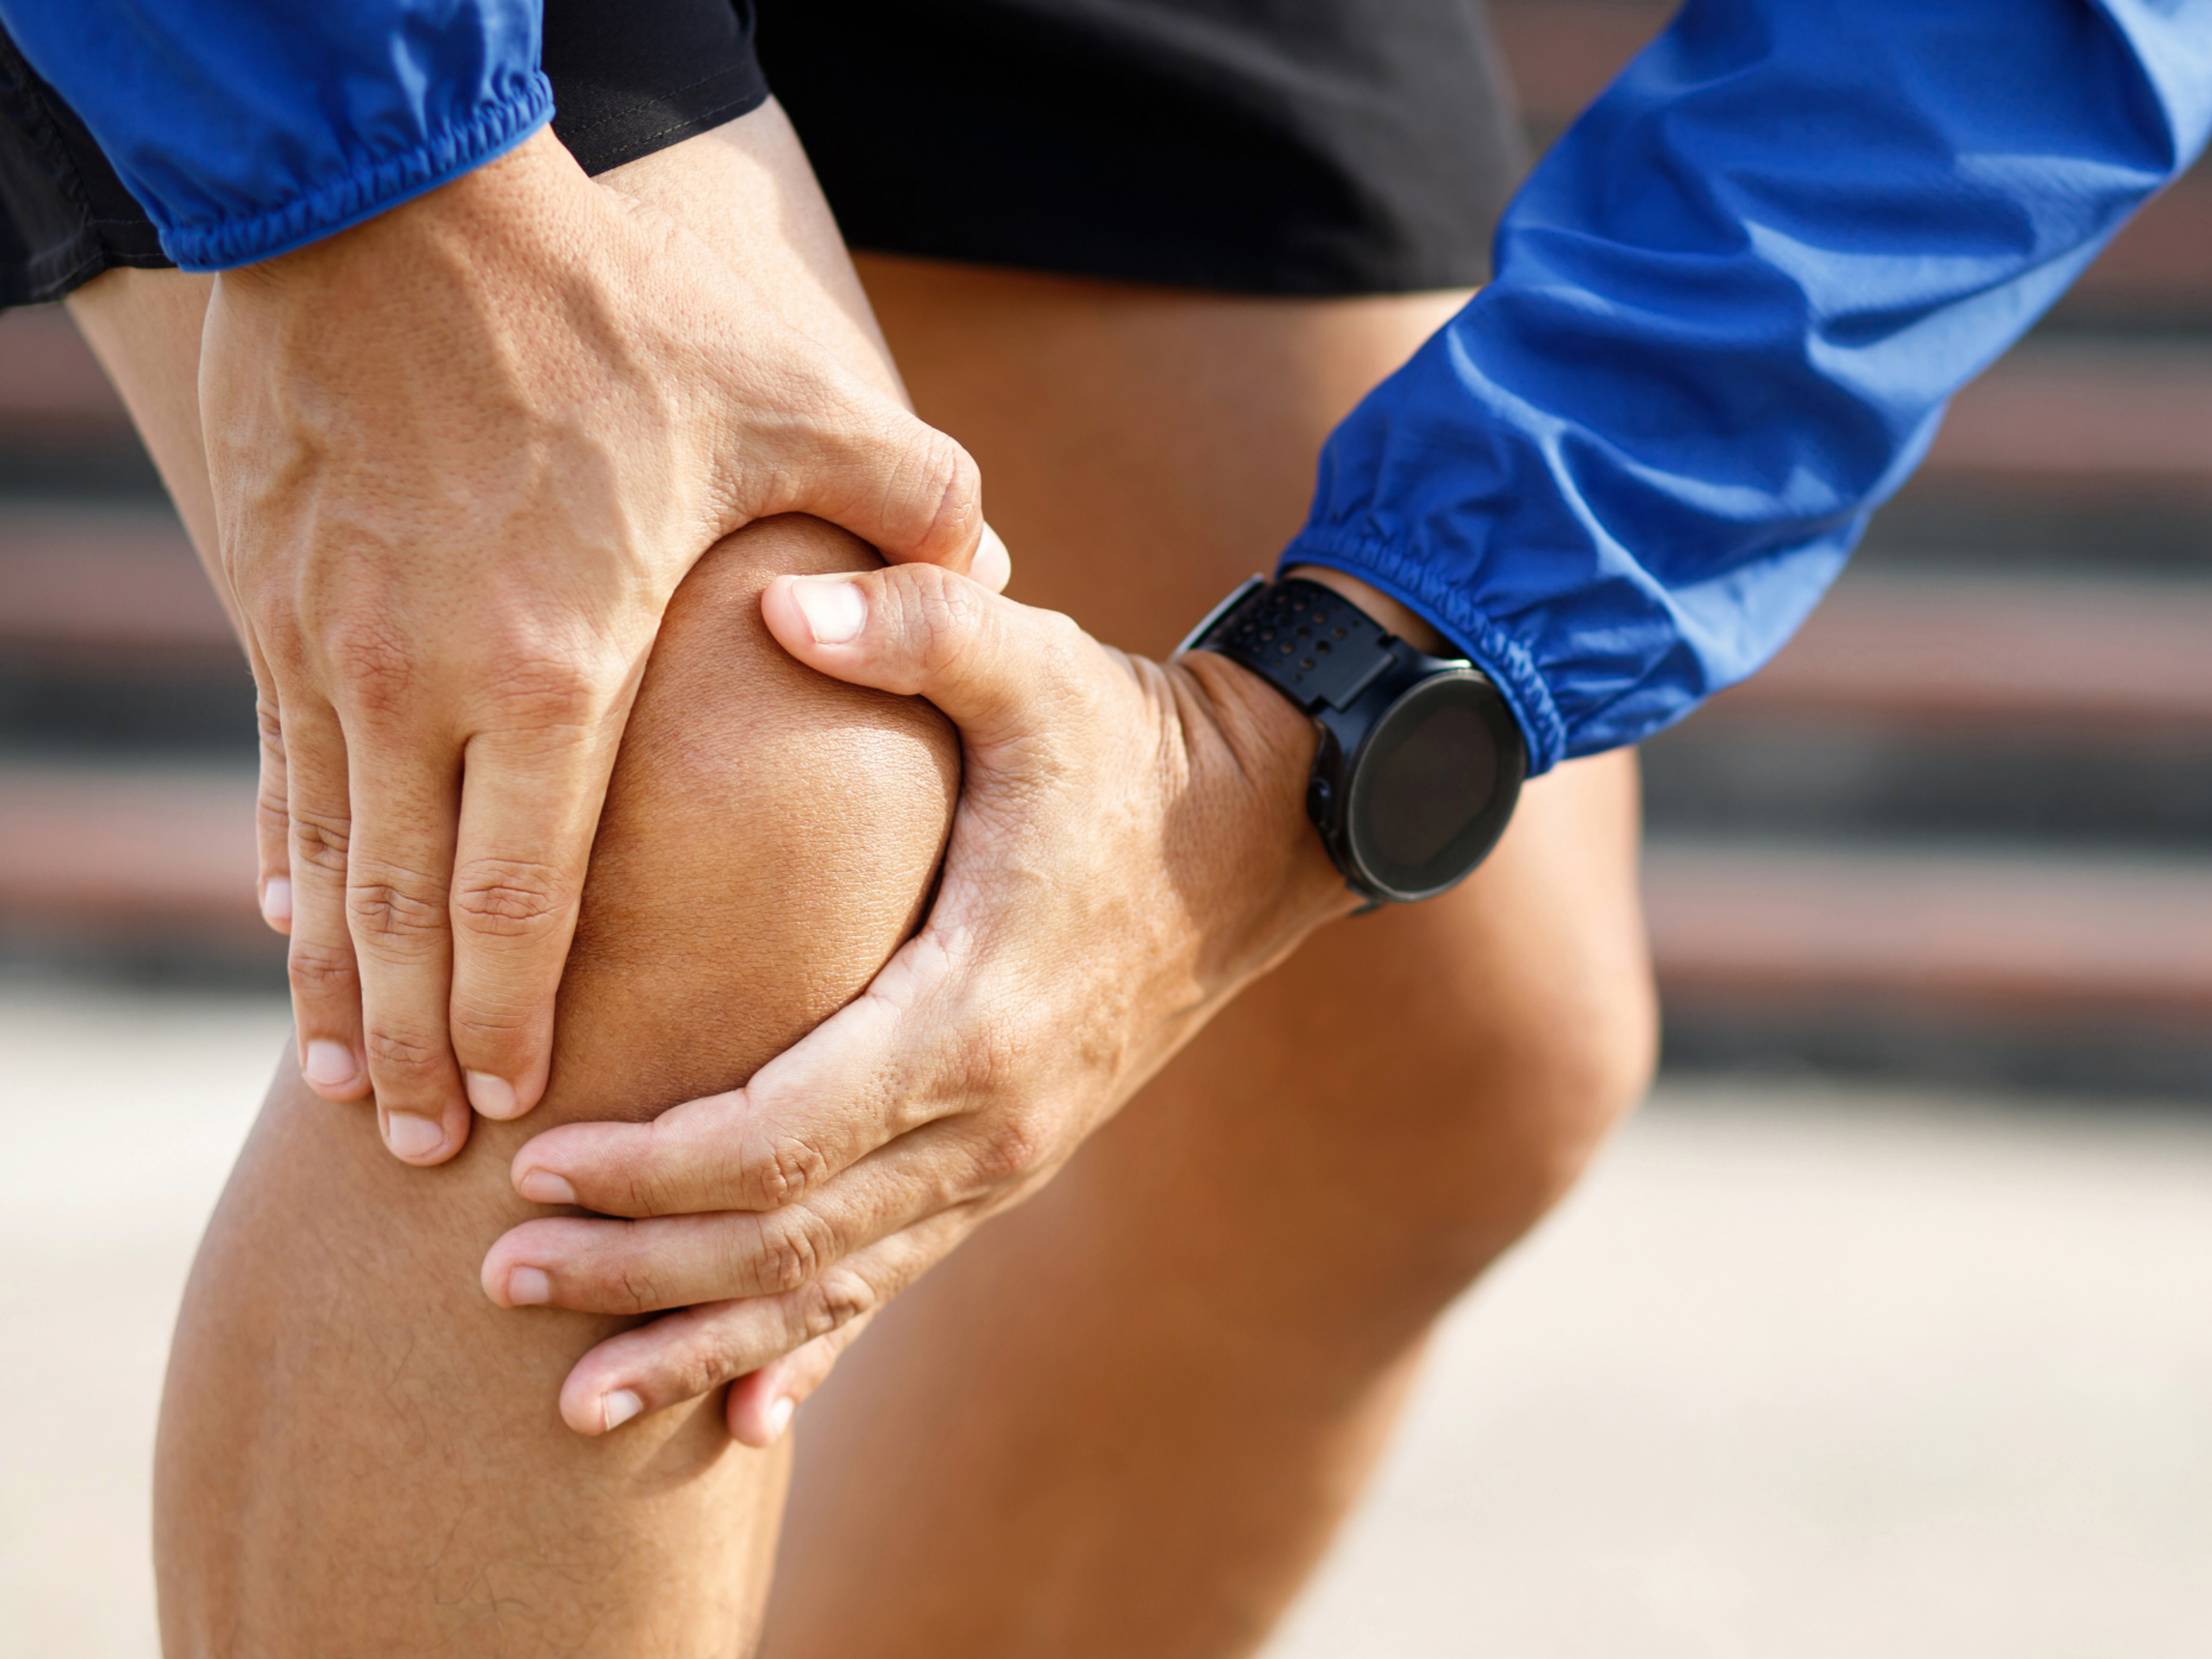 The pain from a meniscus tear is felt on the knee joint line.